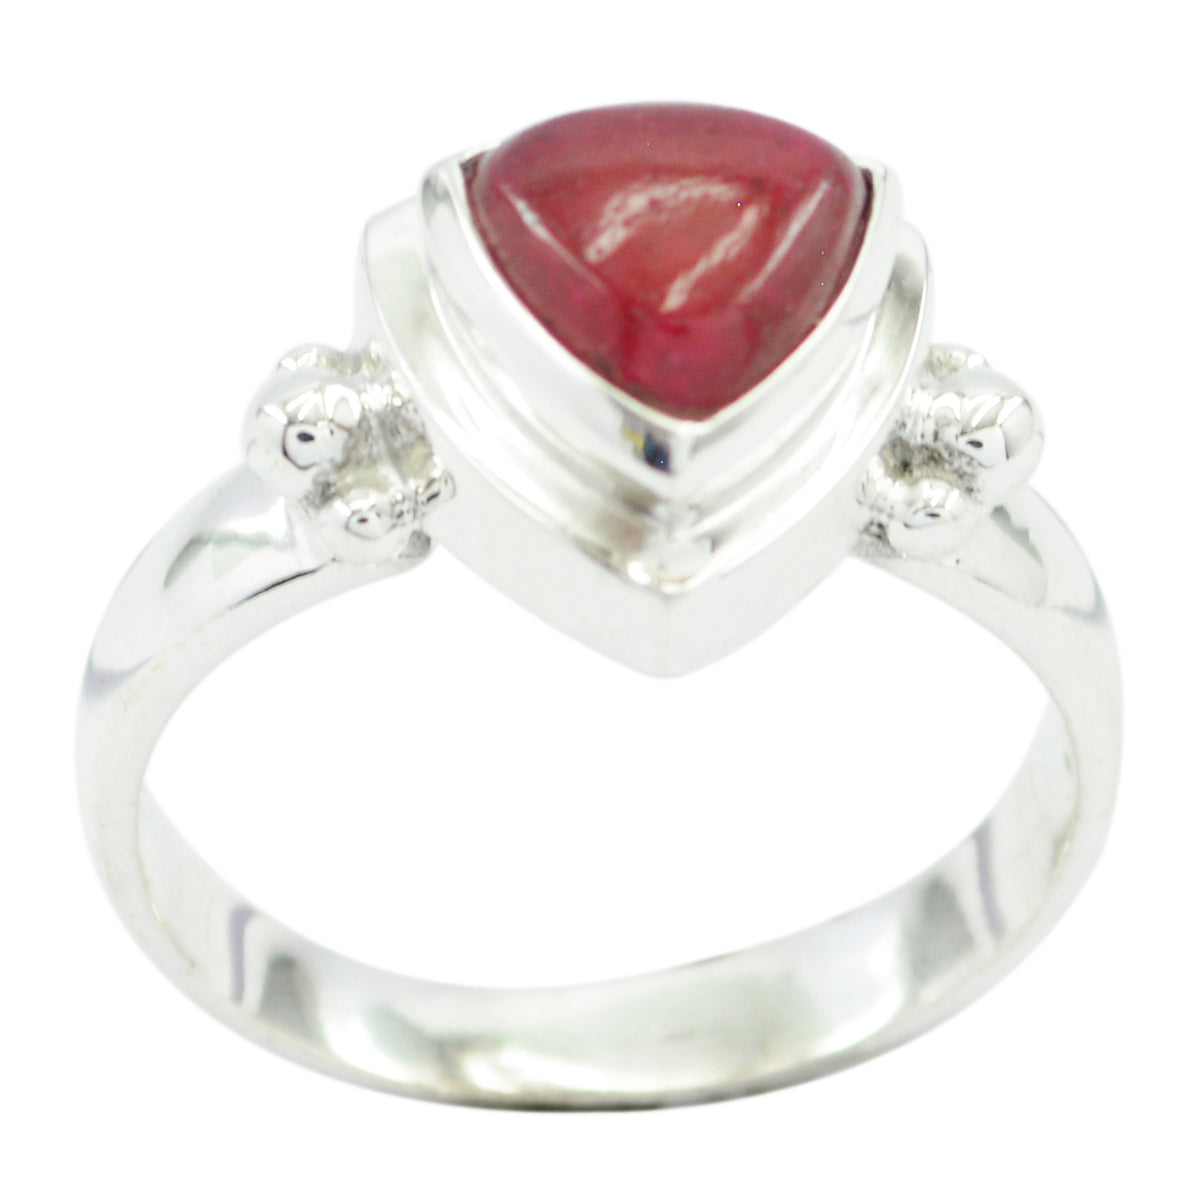 Engaging Gemstones Indianruby Sterling Silver Rings Jewelry Showcase